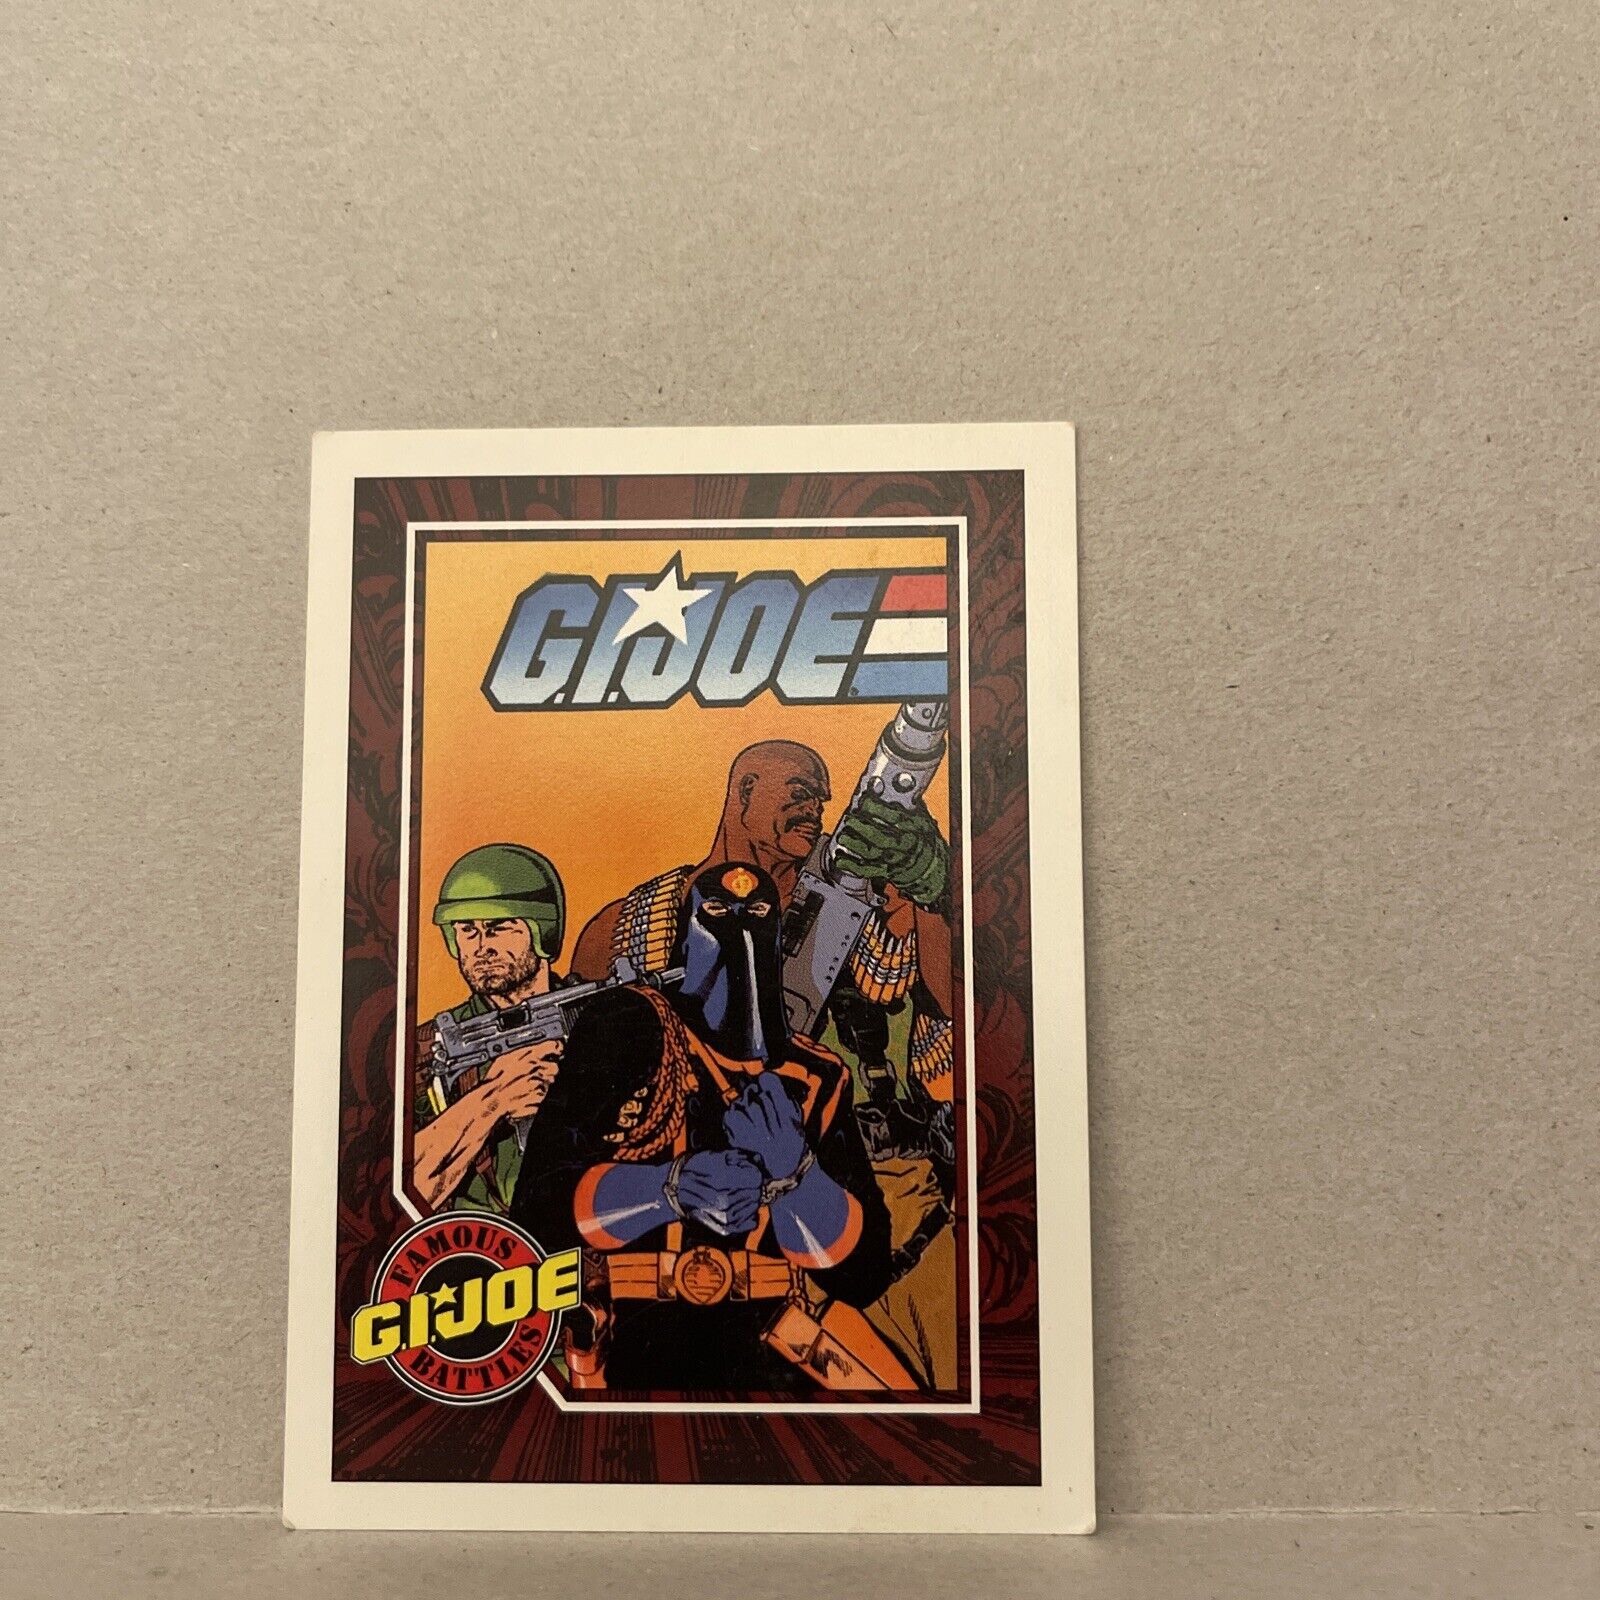 1991 Impel GI Joe Series 1 Trading Cards #1 to 200 complete your collection pick